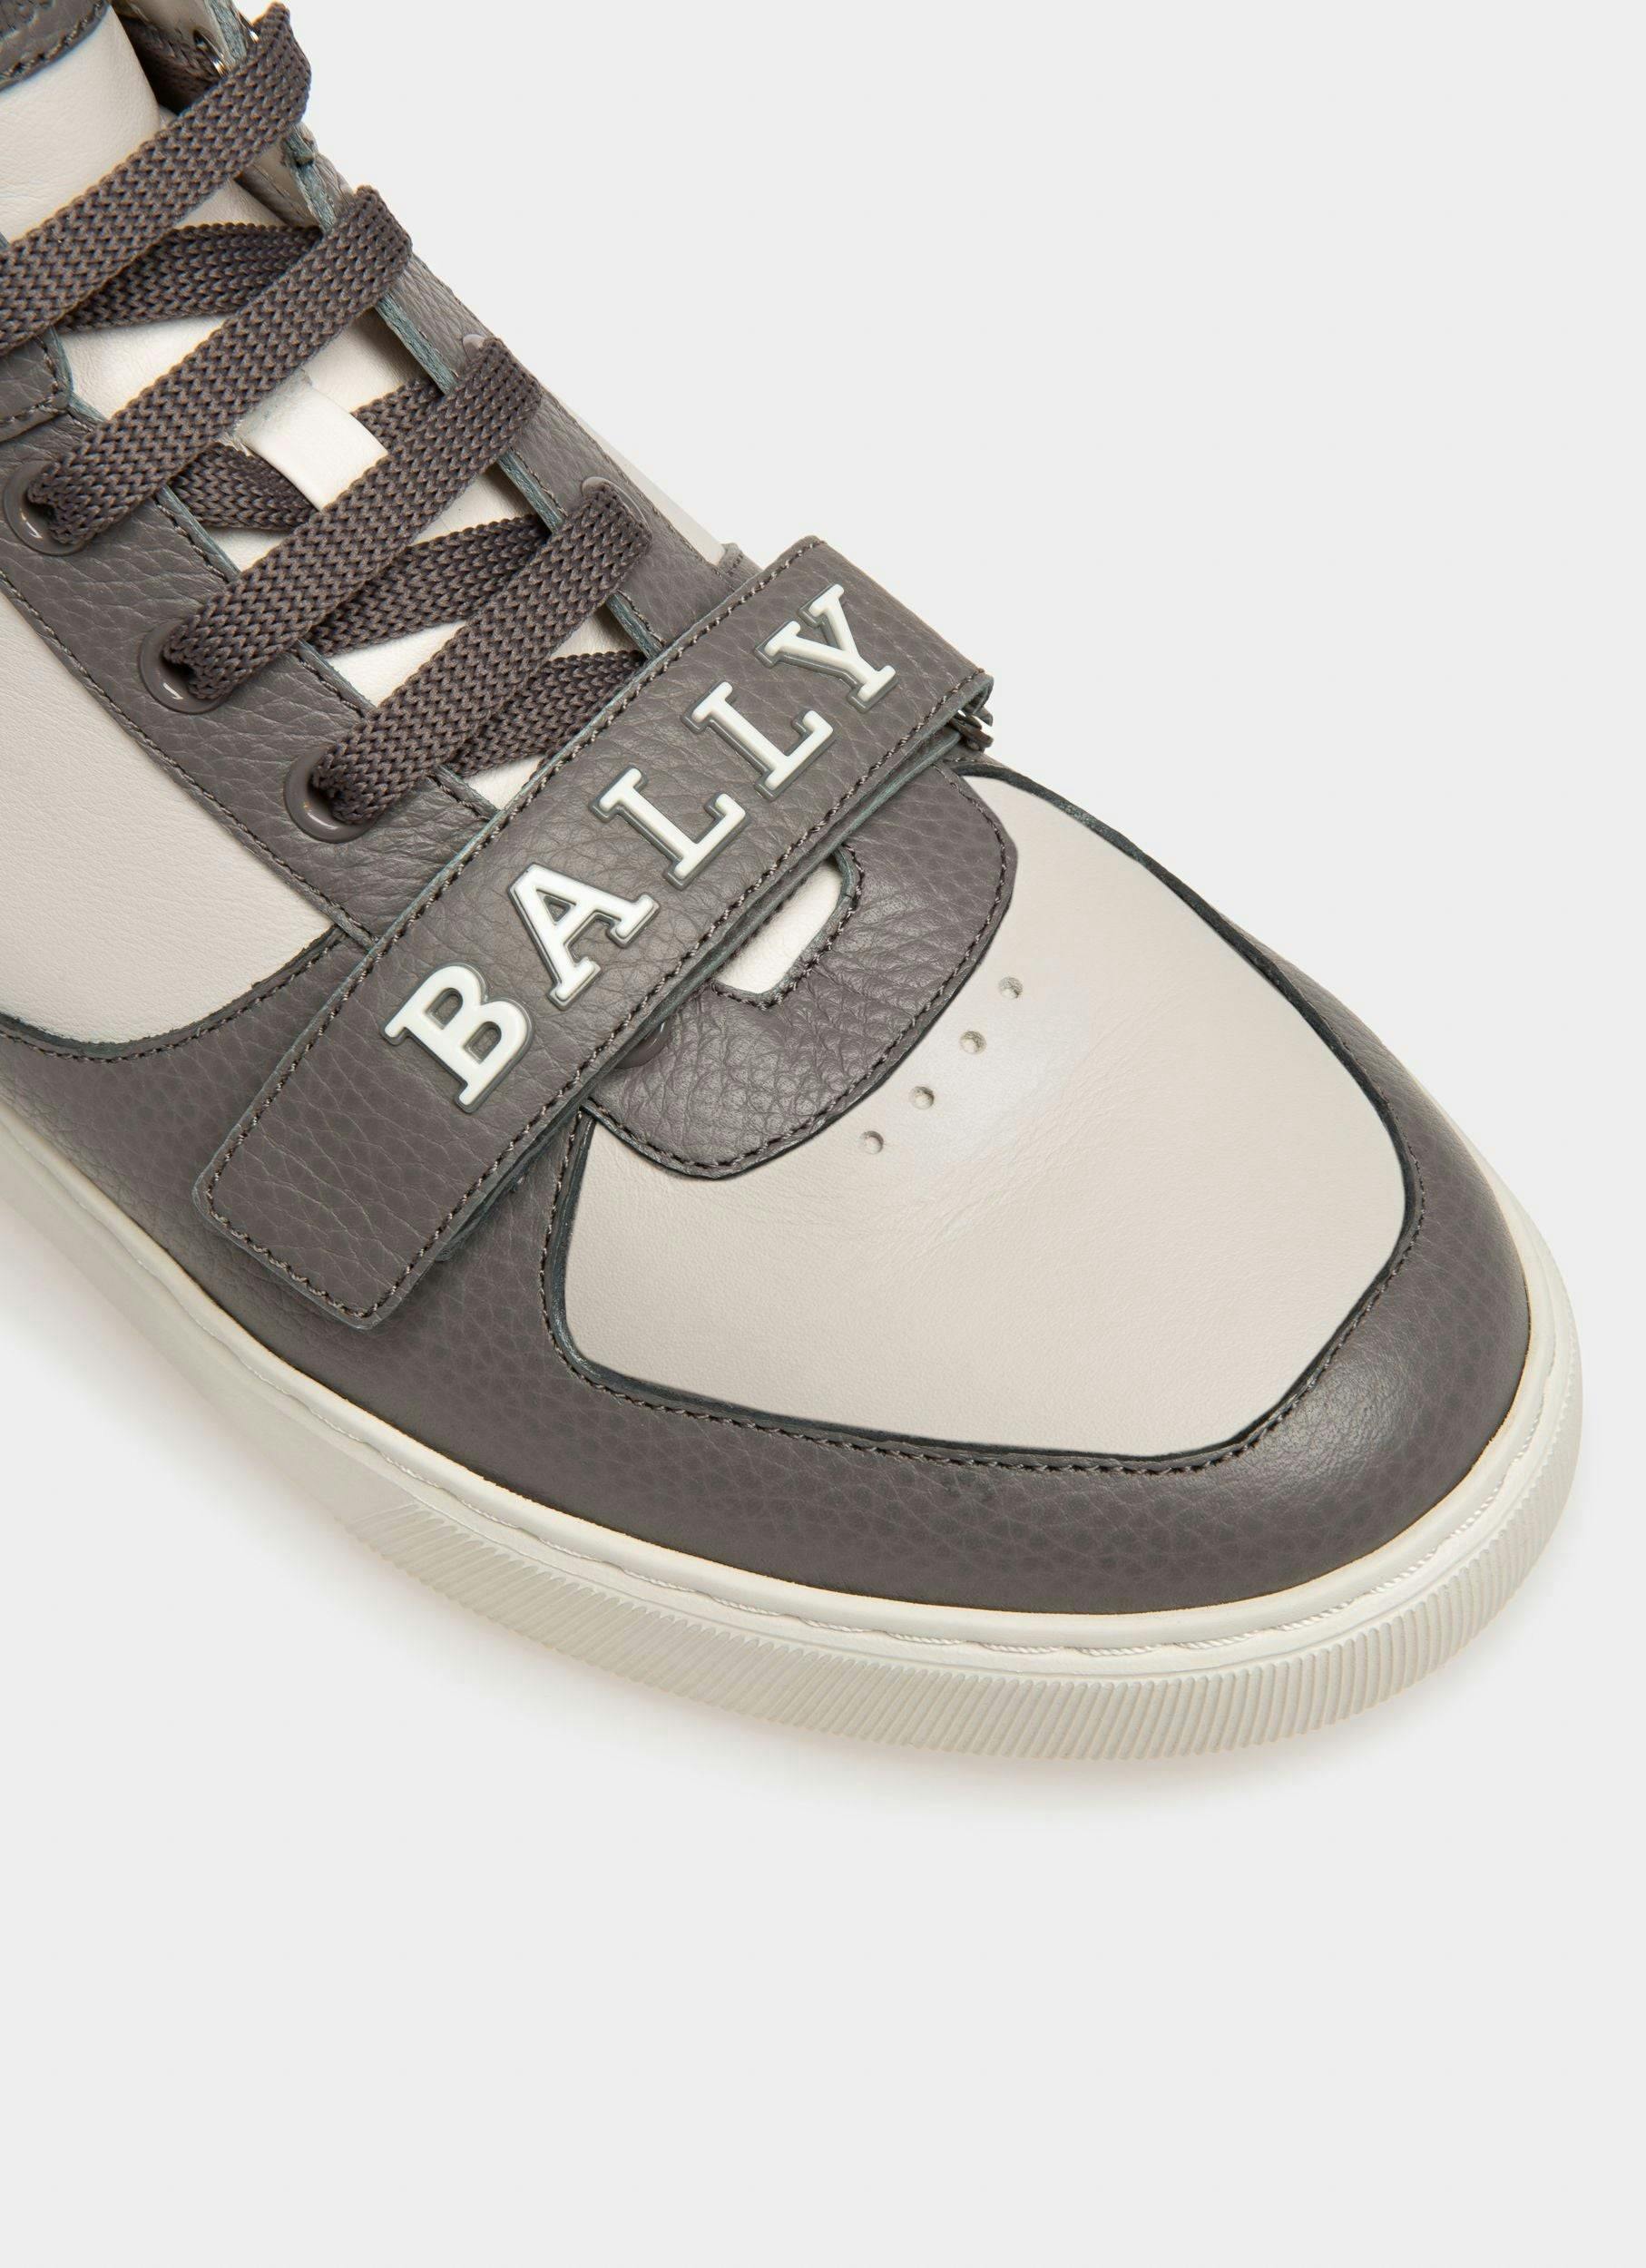 Merryk Leather Sneakers In Grey And White - Men's - Bally - 06